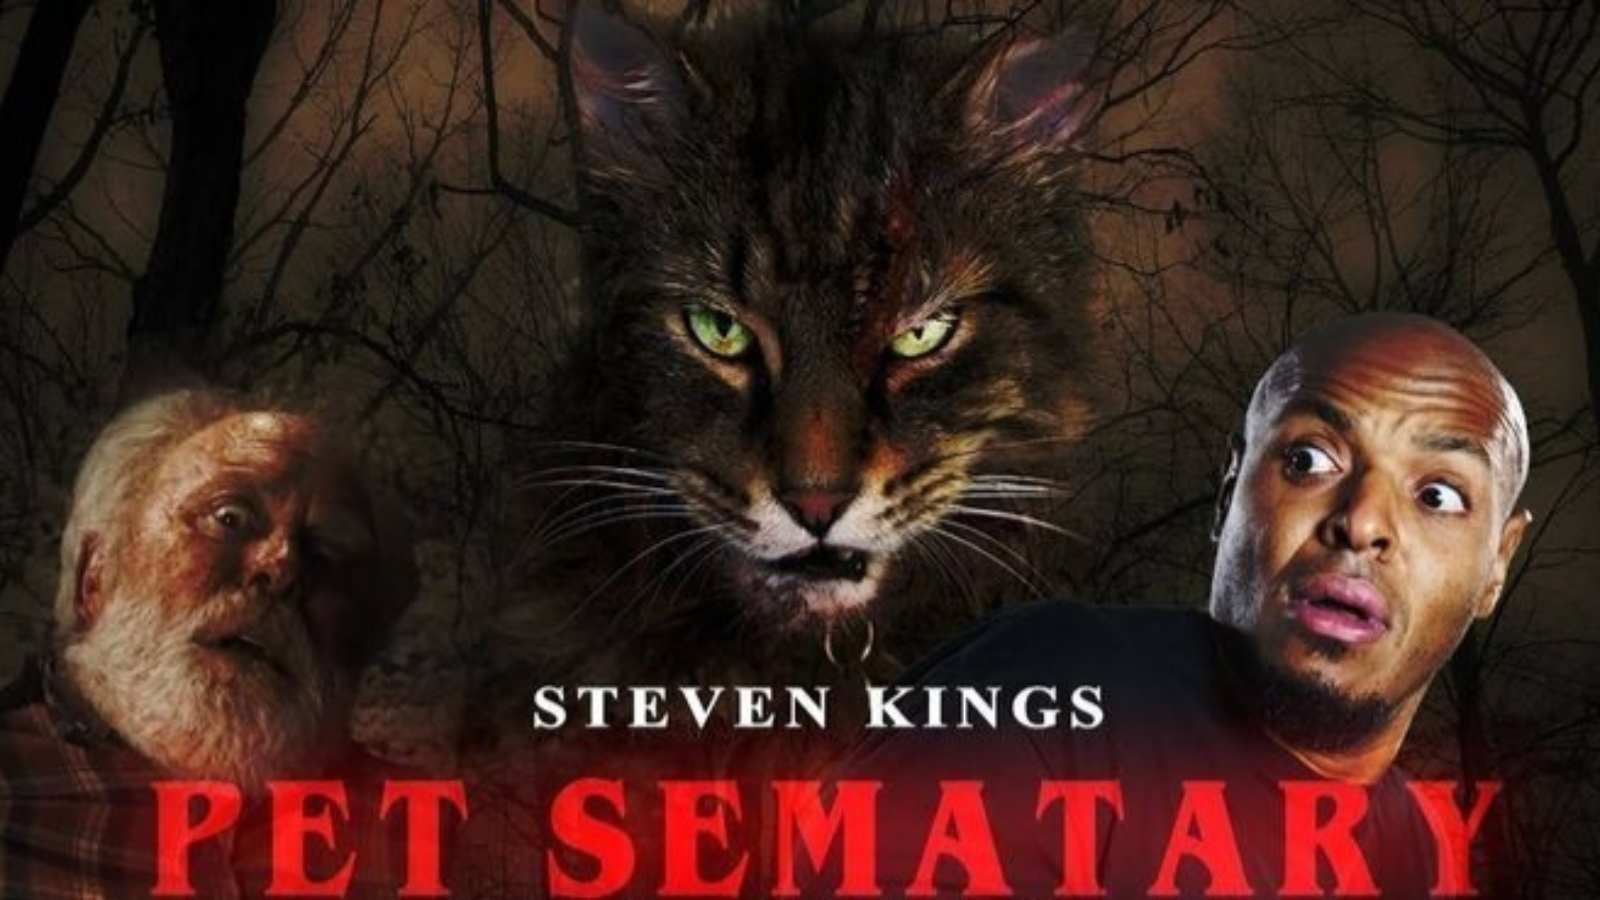 Pet Sematary Bloodlines Release Date, Cast, Plot, Synopsis, and Trailer